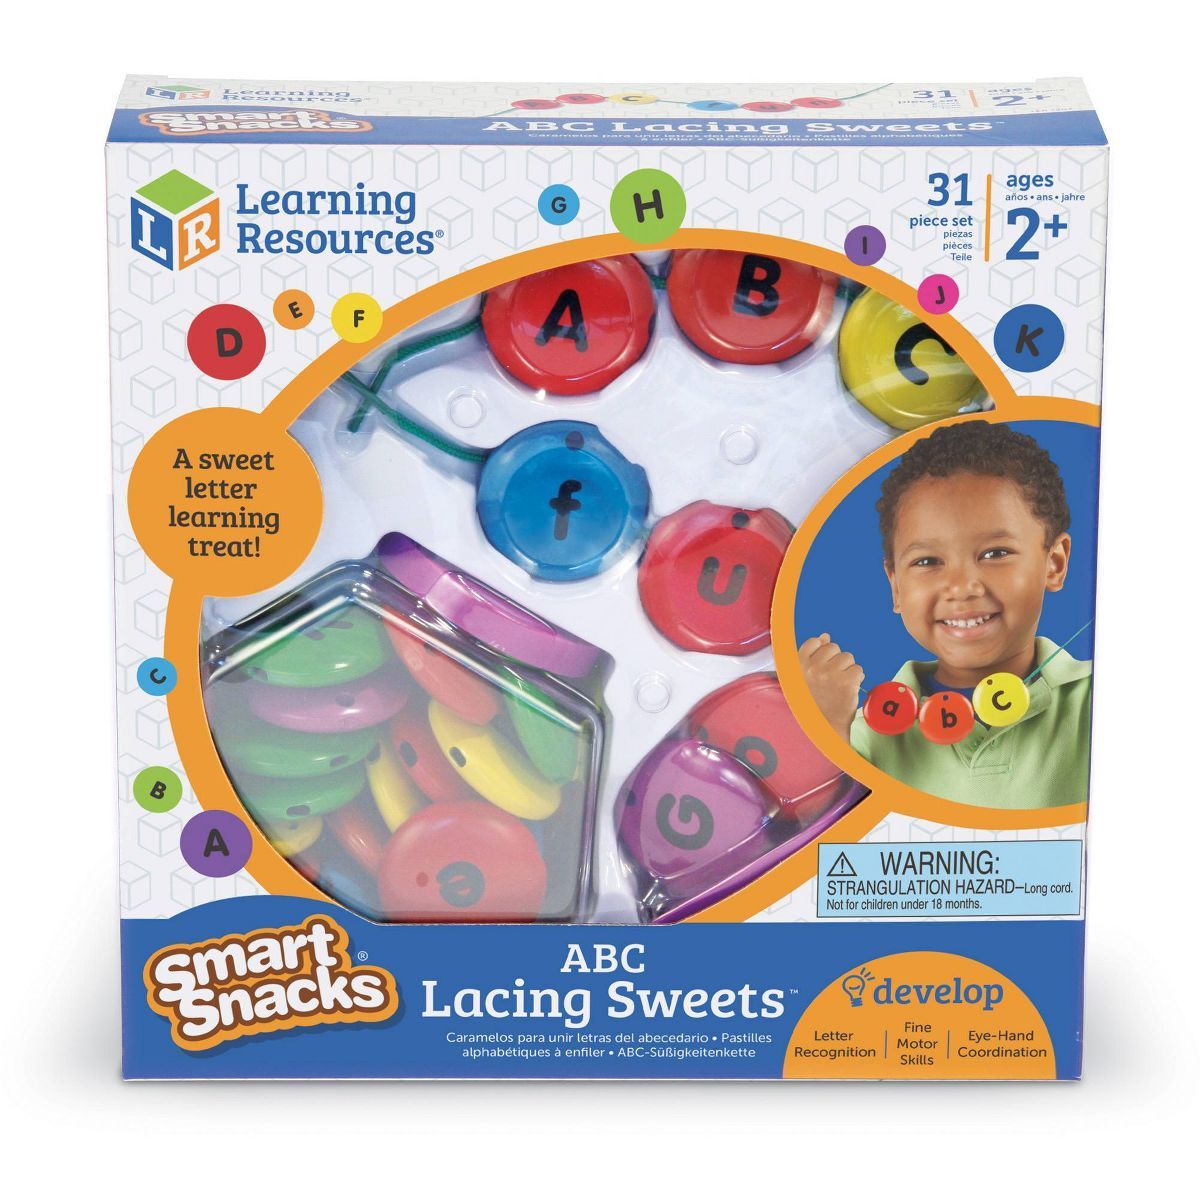 Learning Resources Smart Snacks ABC Lacing Sweets | Target